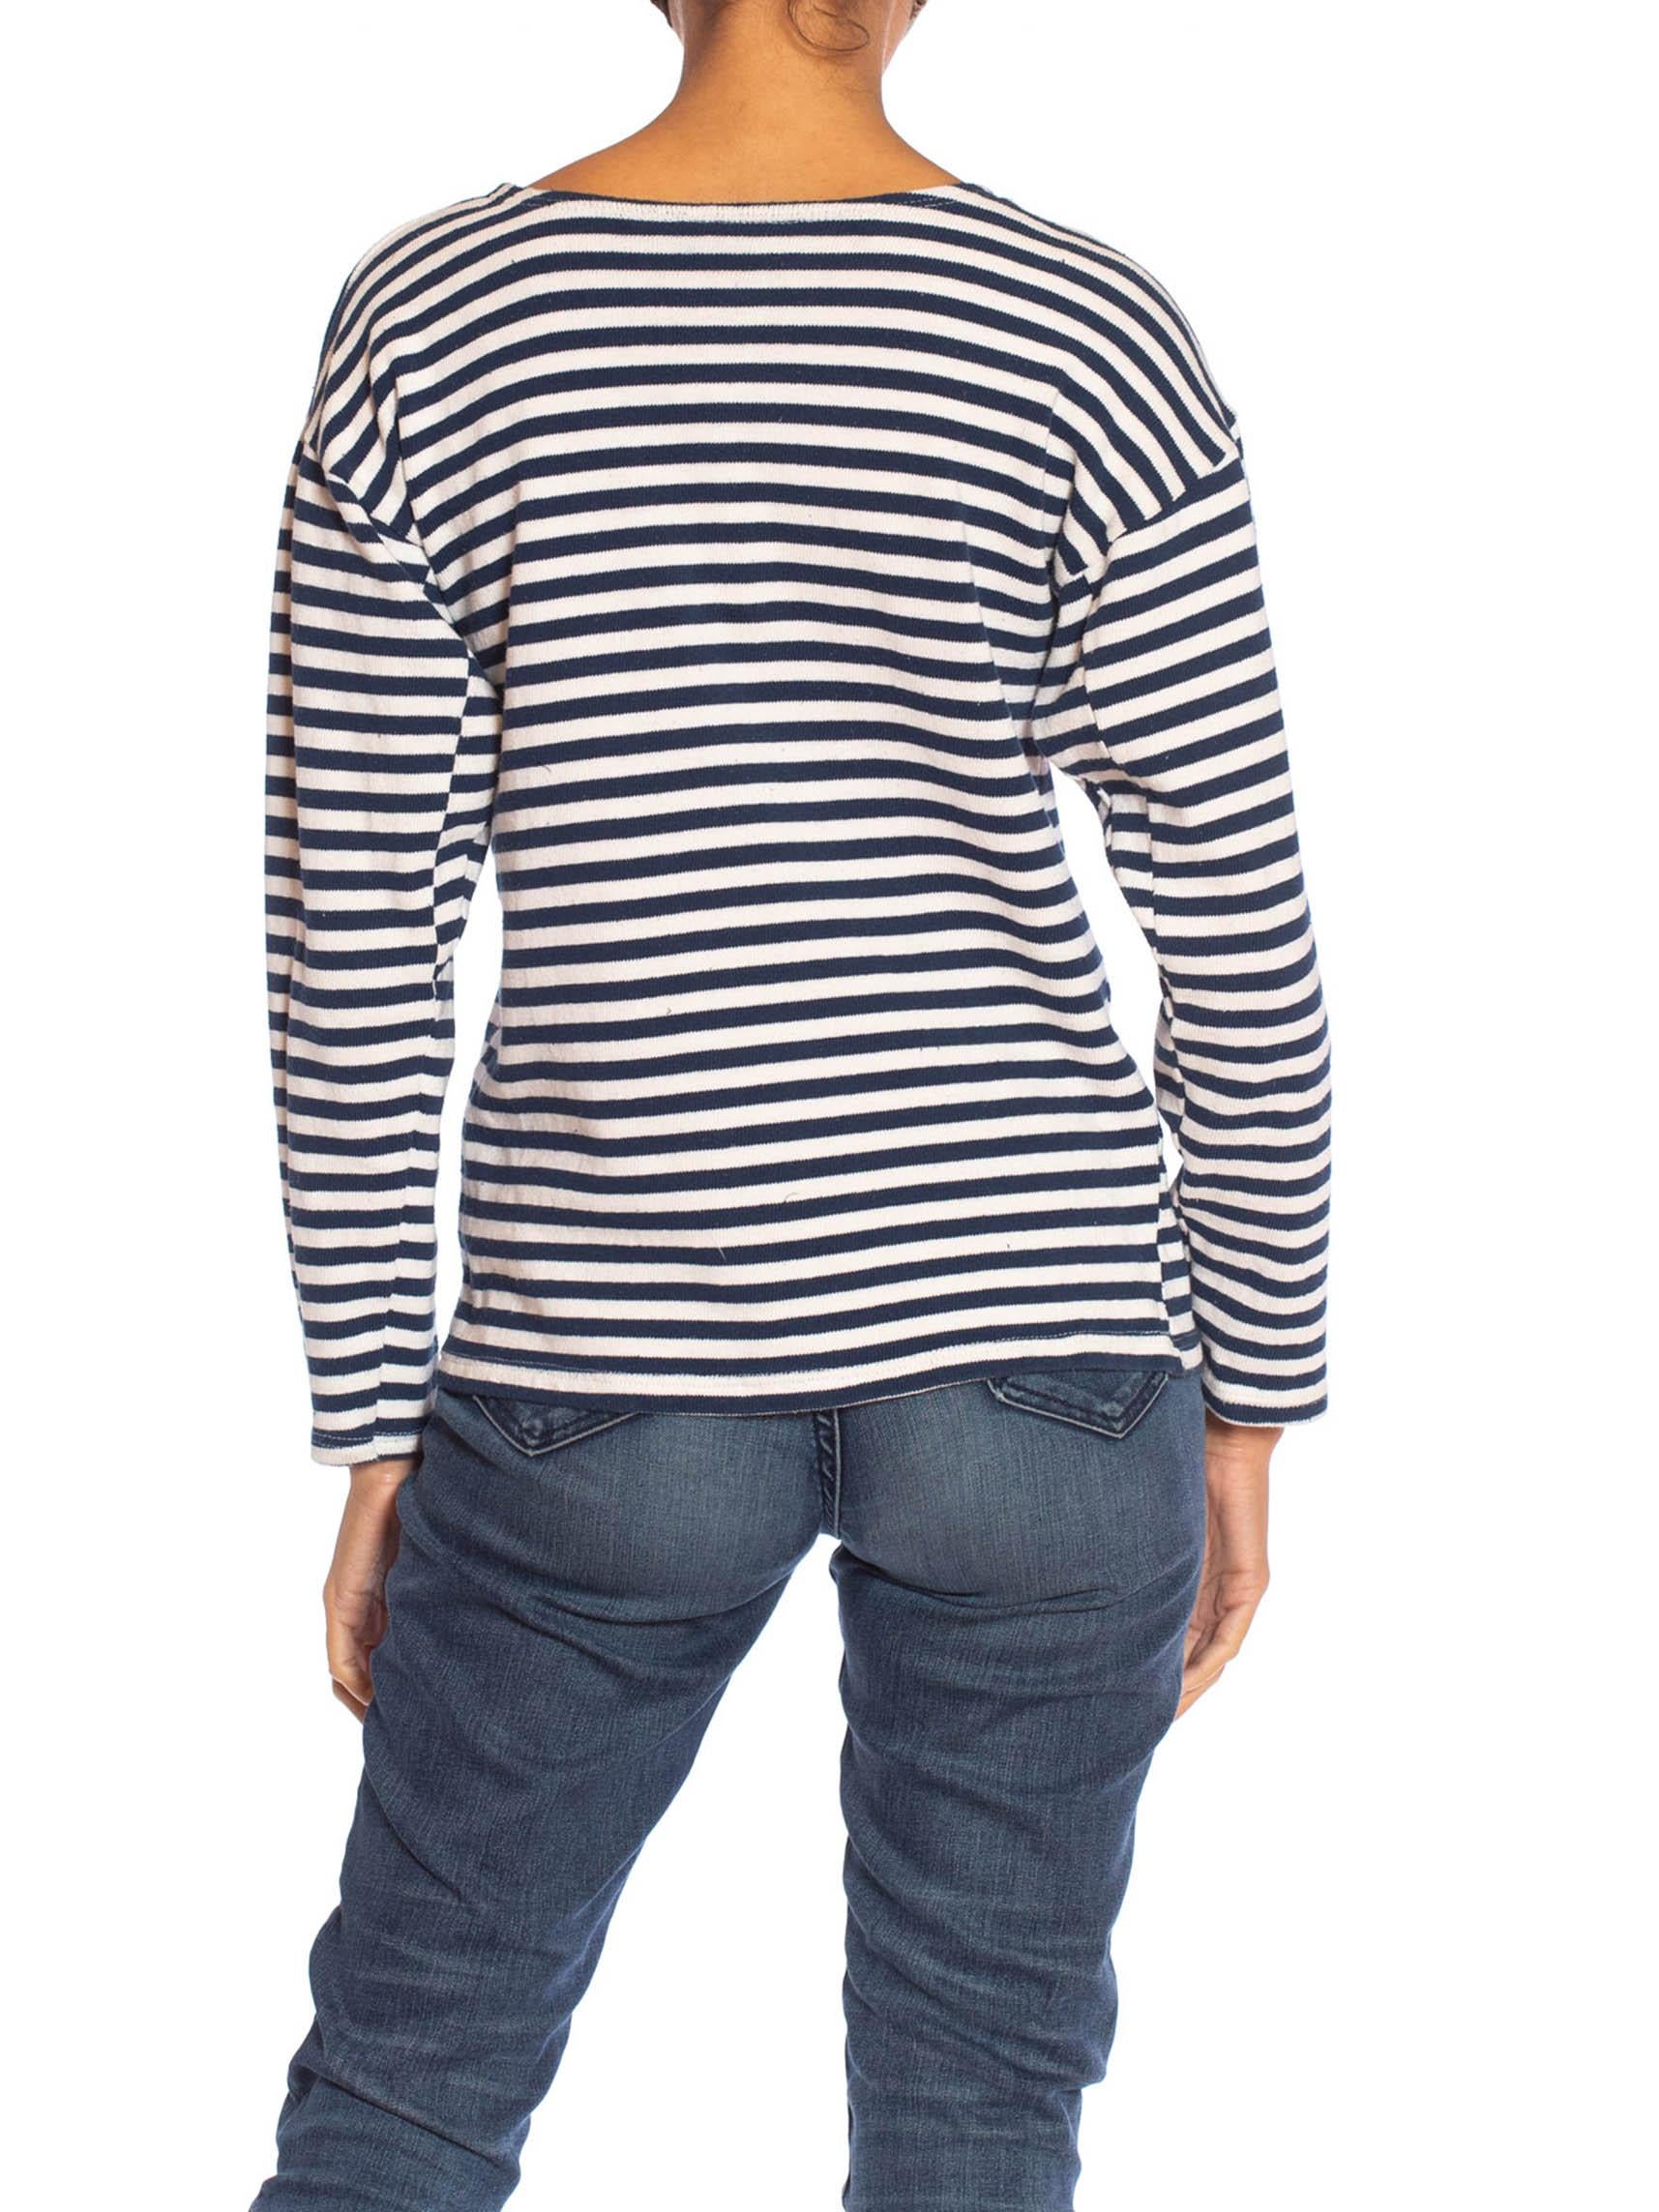 1970S Blue & White Striped Cotton Knit Authentic French Mariner Sweater For Sale 1